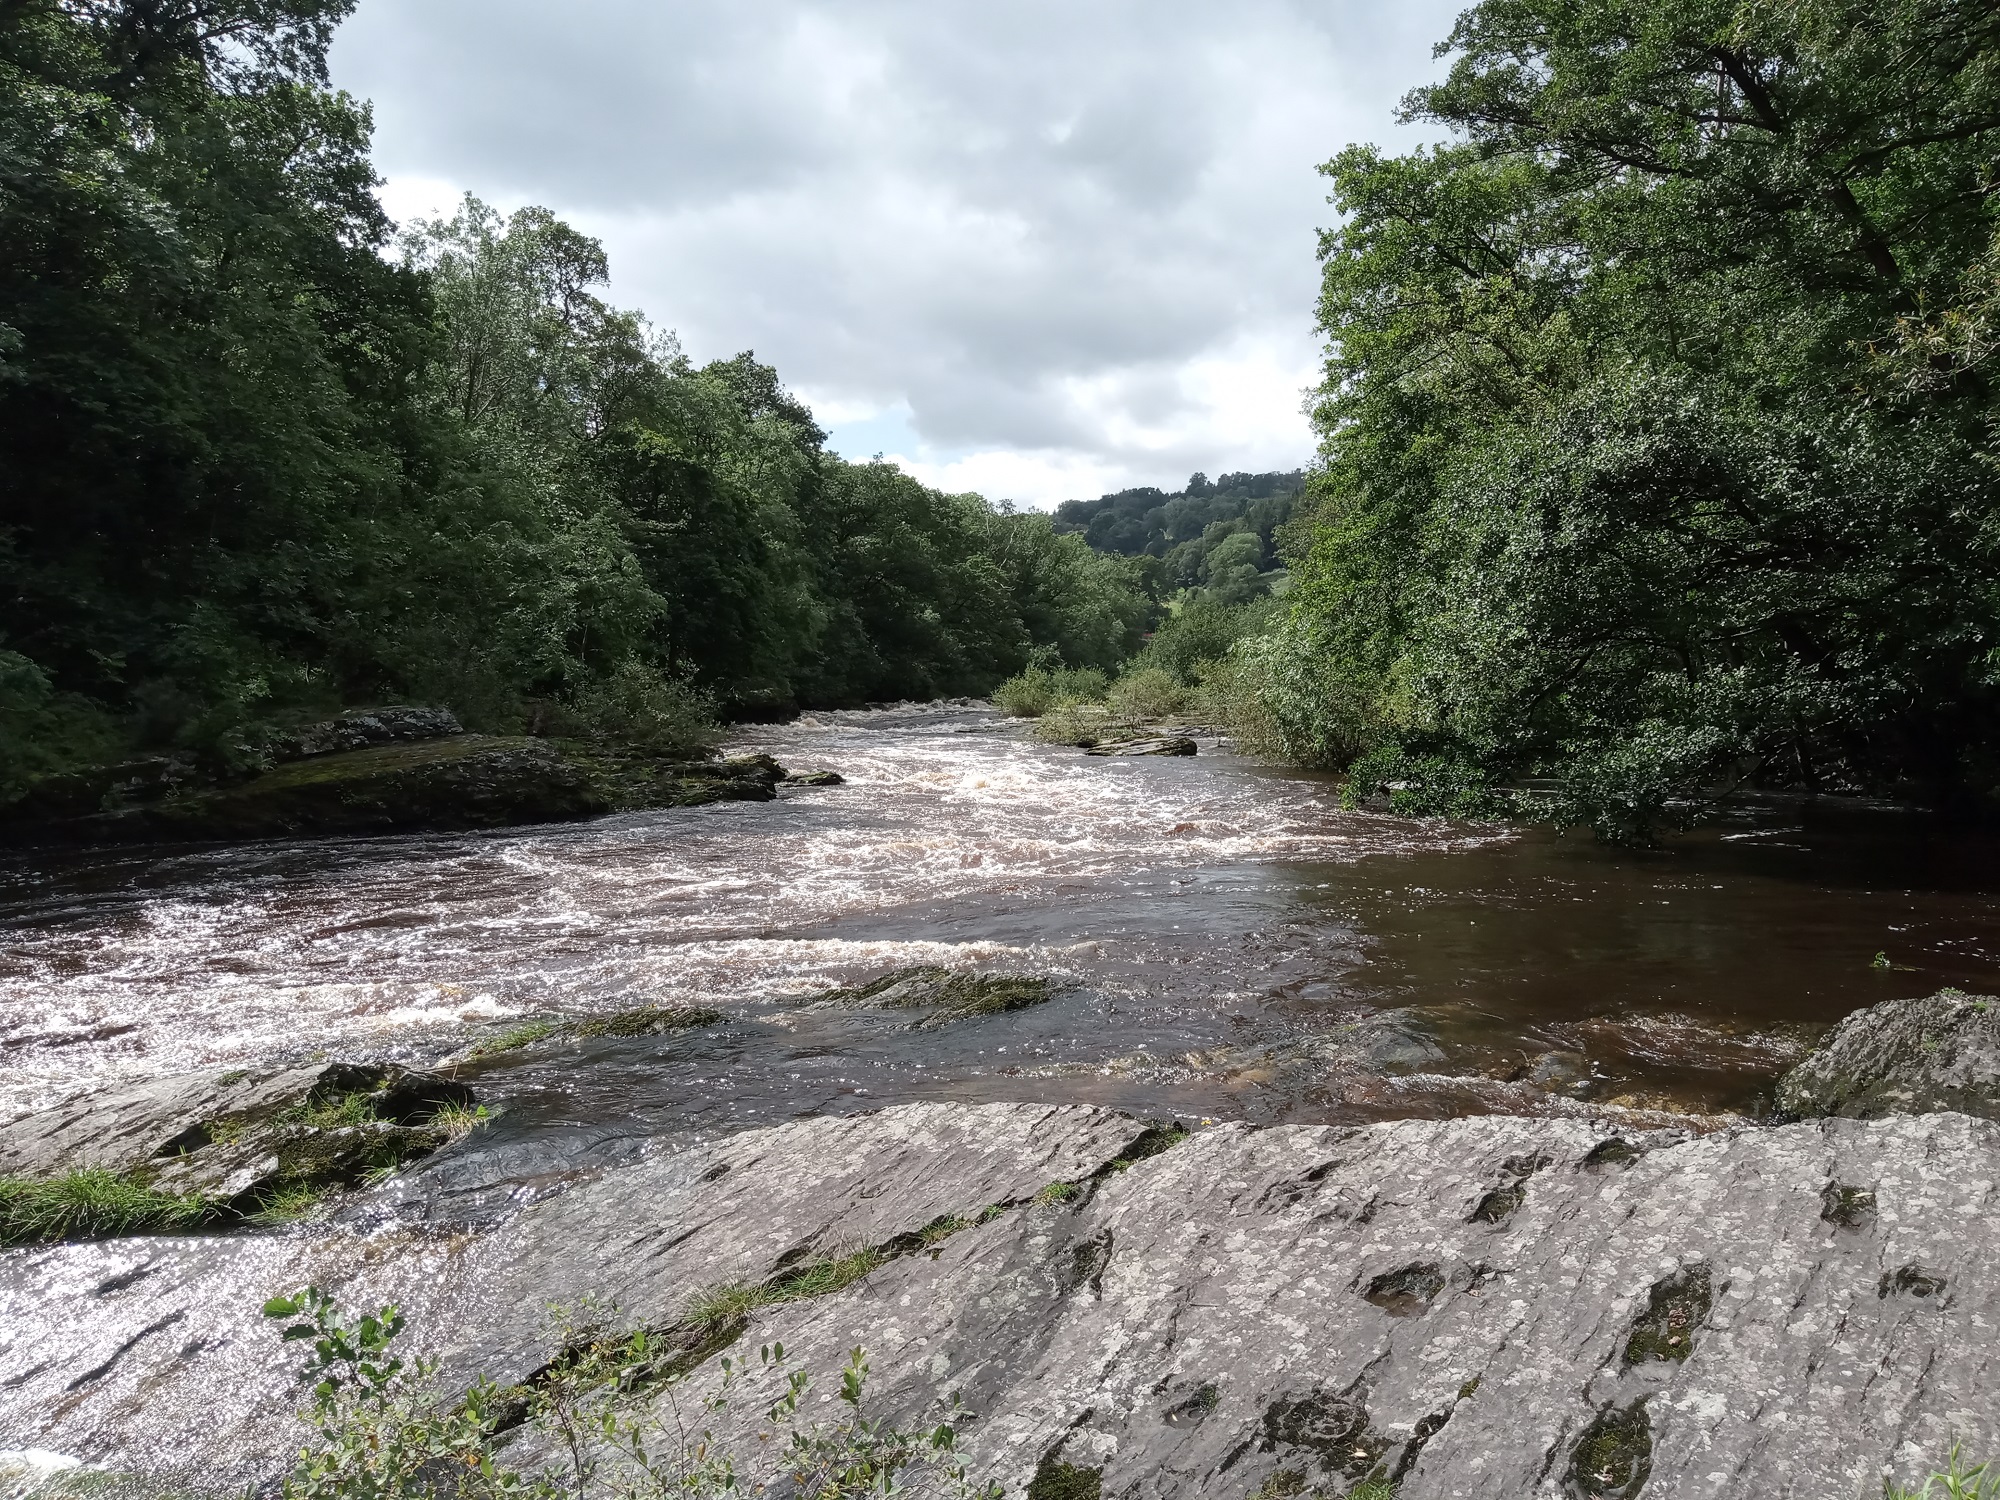 A rocky view of the rapid River Dee